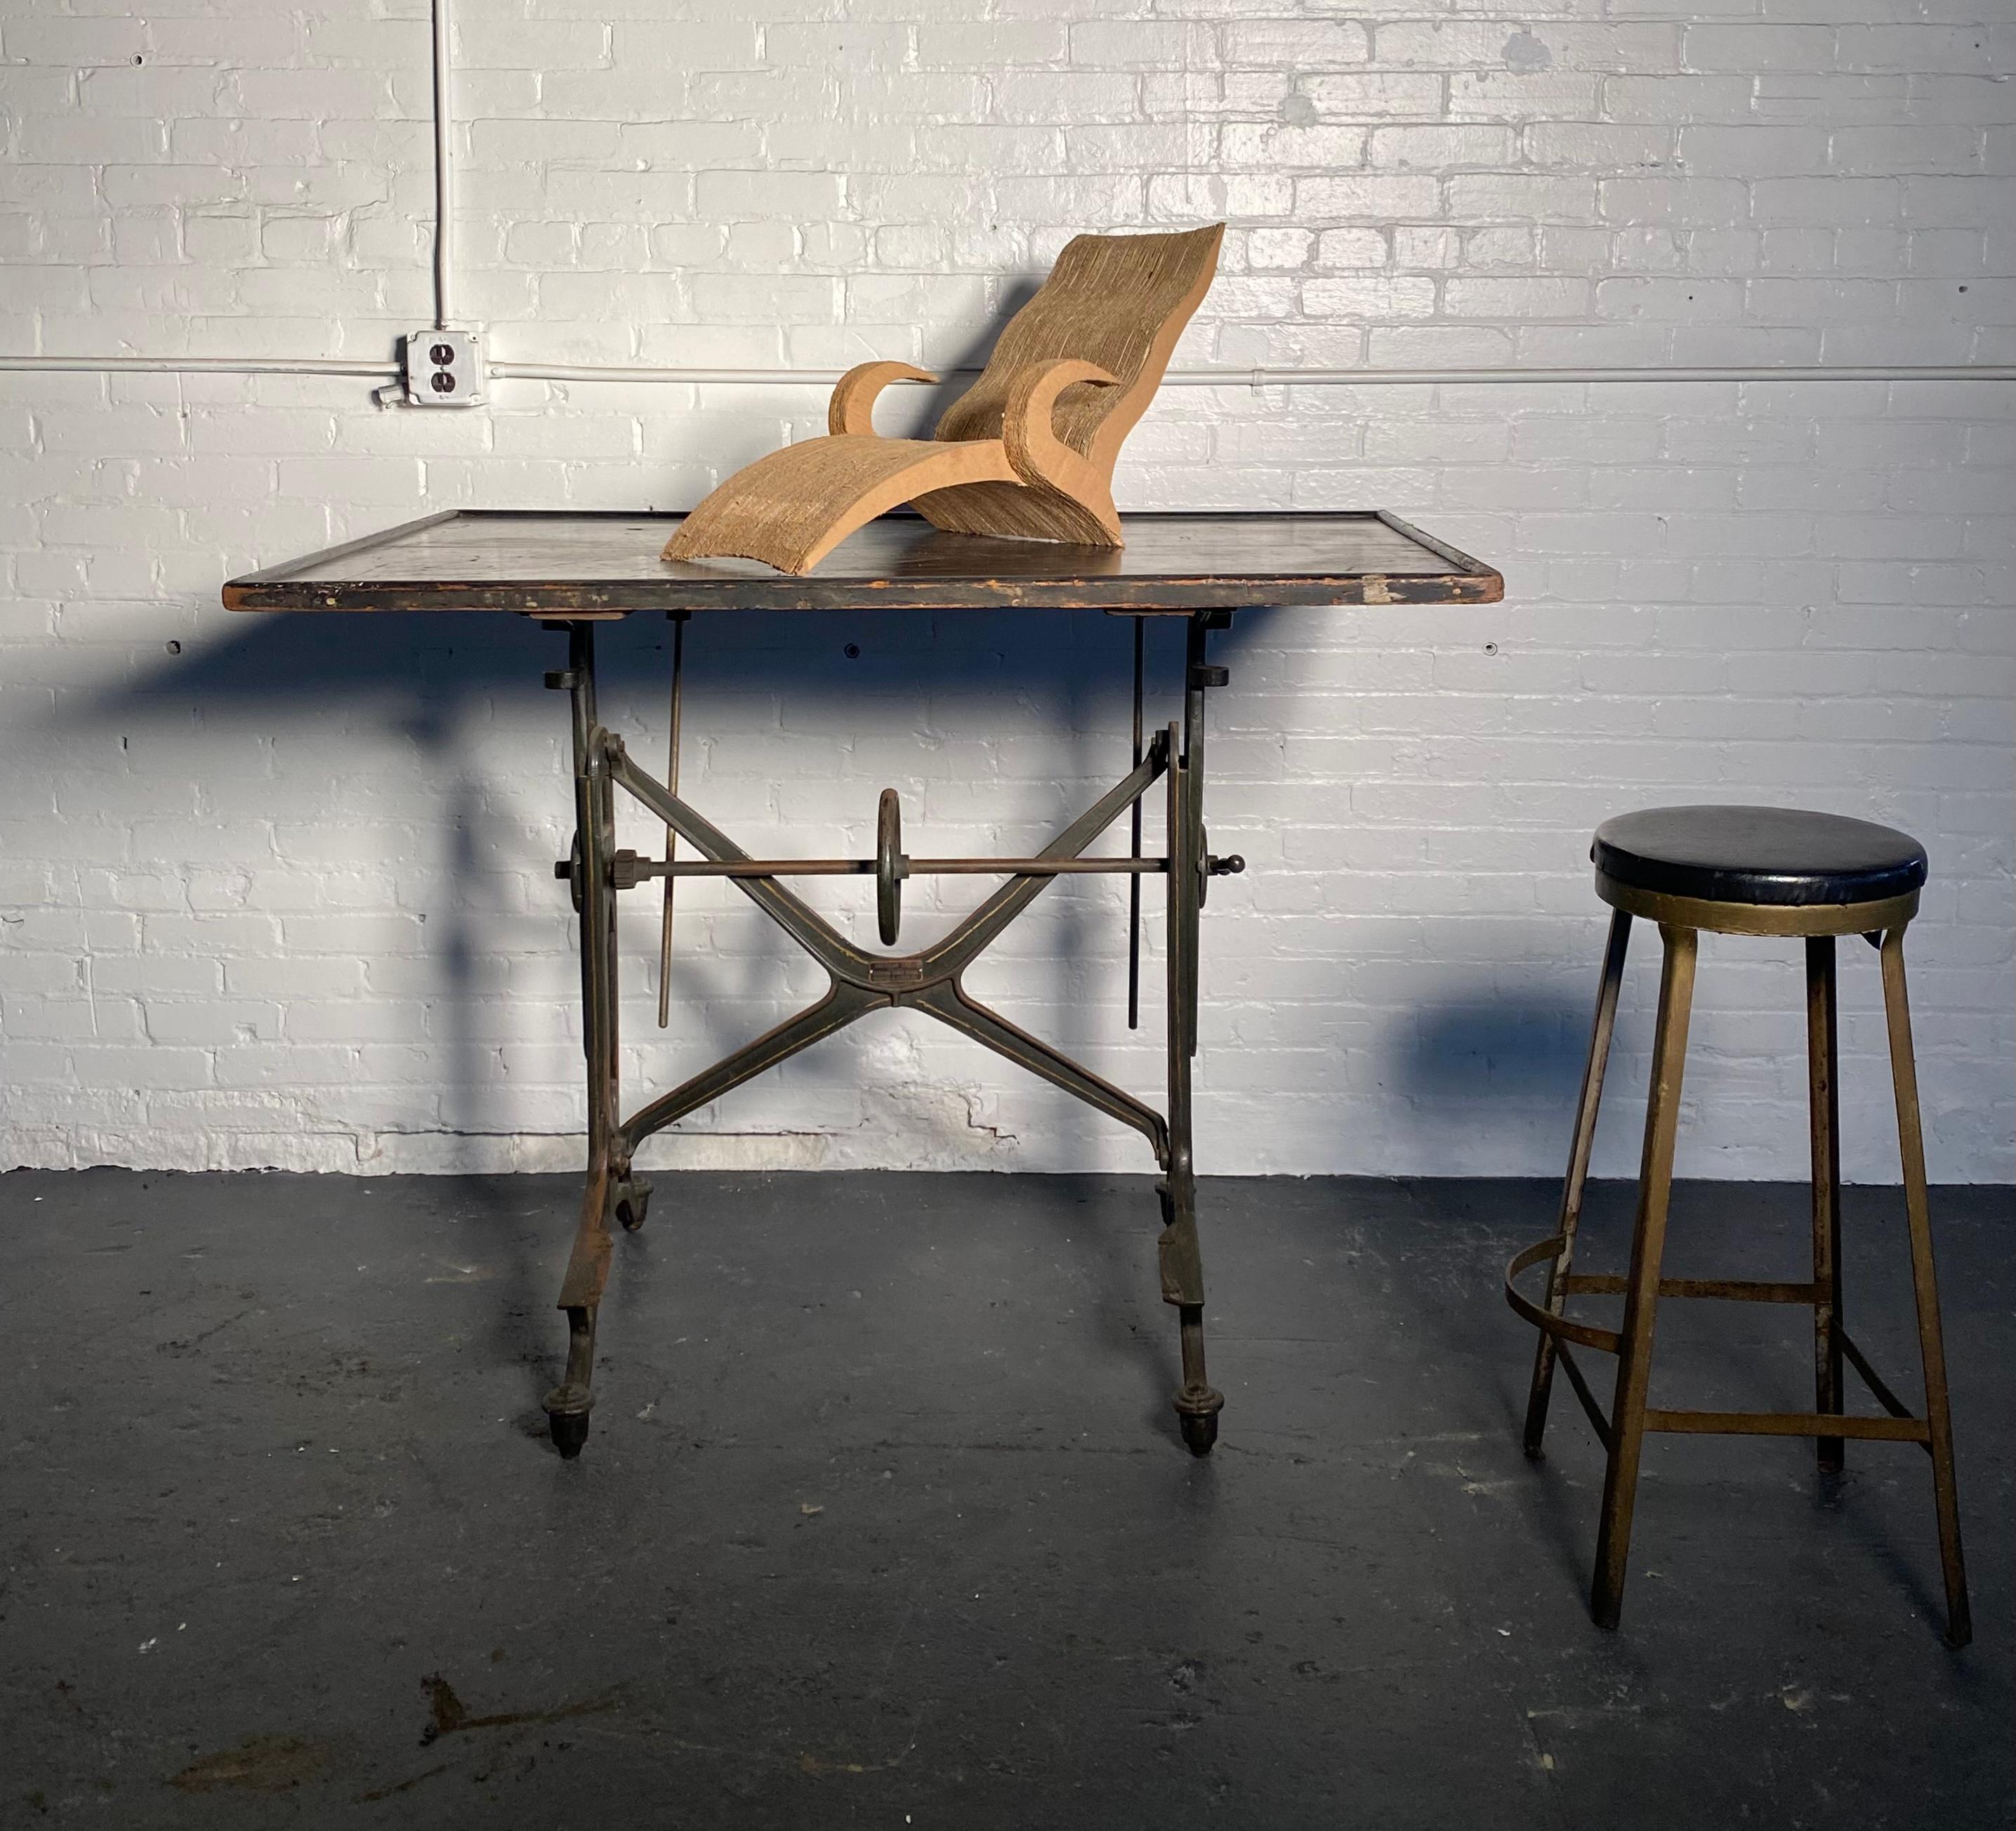  One of only eight made !! Cardboard Chaise Lounge designed and created by Joel Stearns, similar to one in the Lois Lambert Gallery..Amazing modernist sculpture.. 

,Joel Stearns, who at one time ran an art-publishing firm that produced cardboard